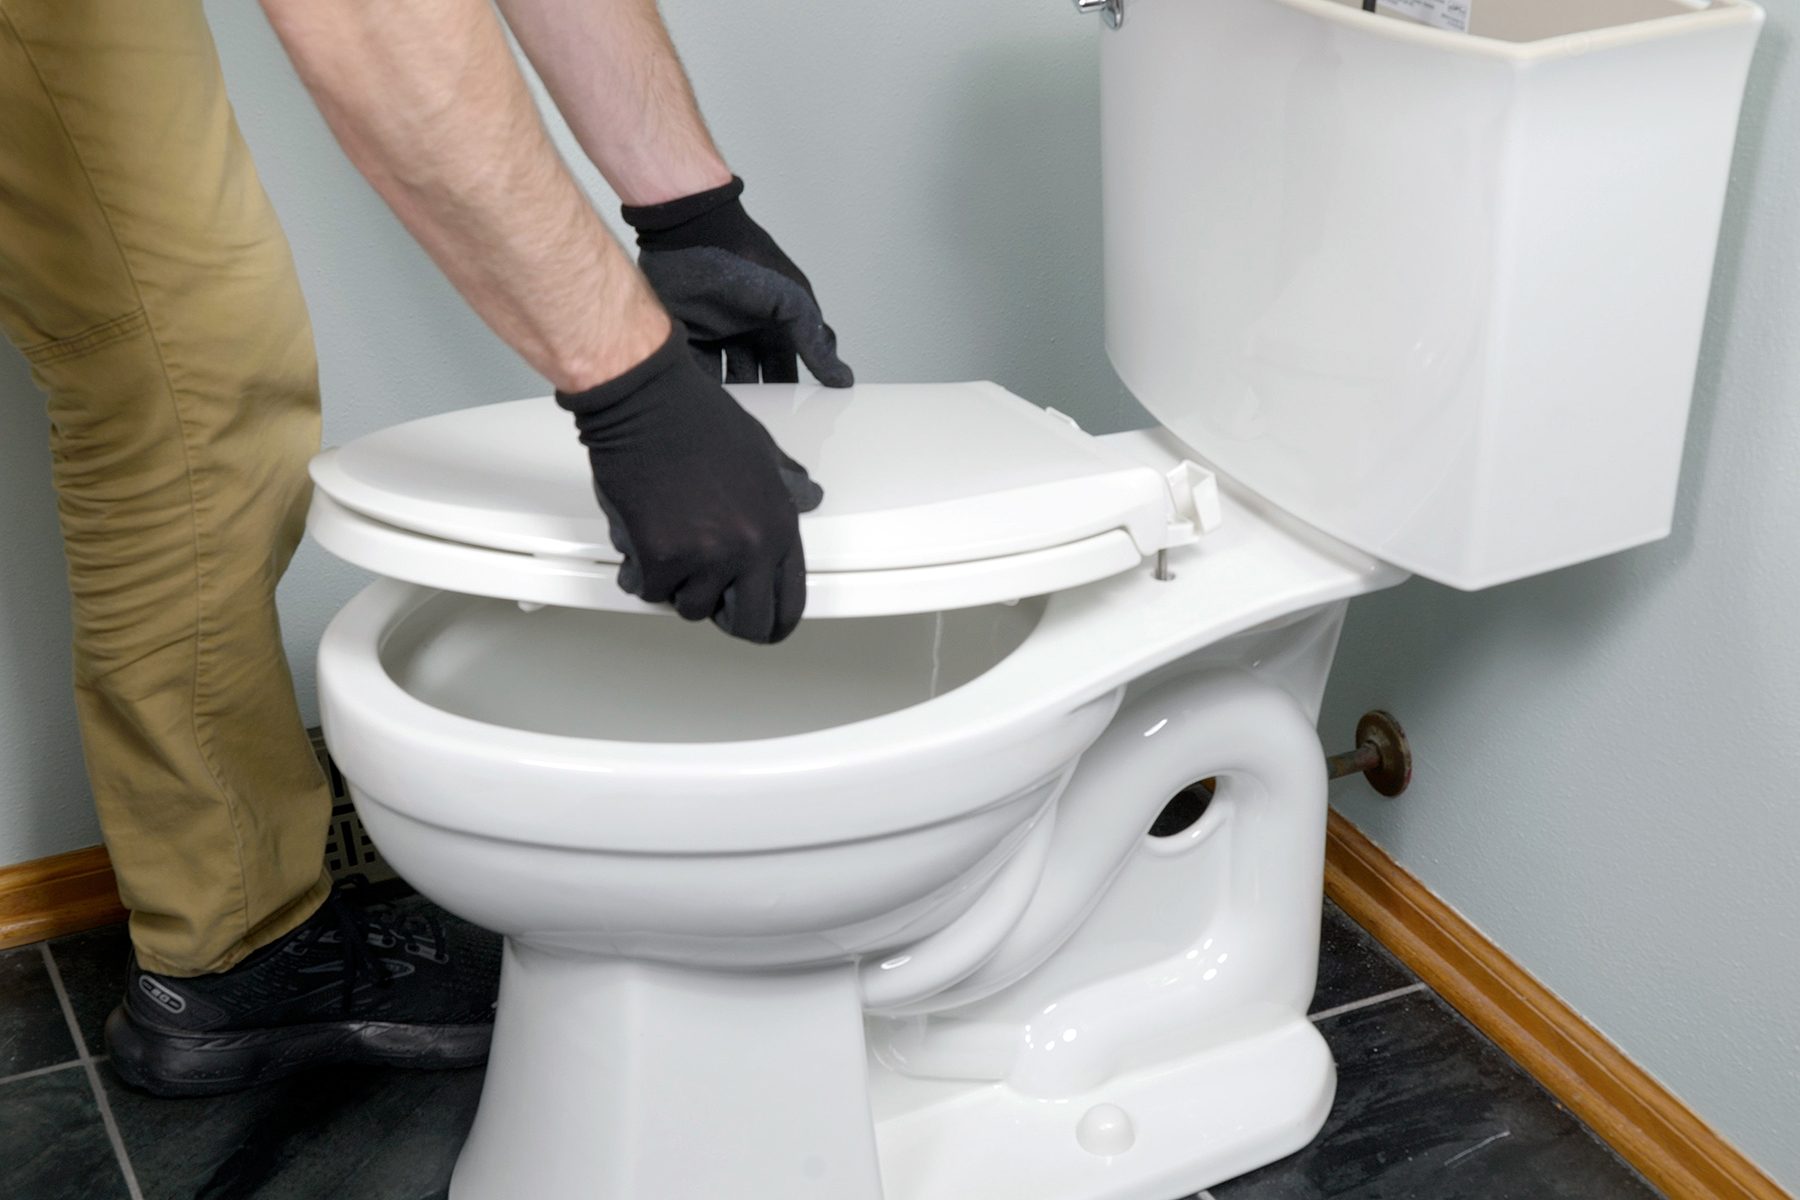 How To Replace A Toilet Fhmvs23 Mf 12 04 Replacetoilet 11